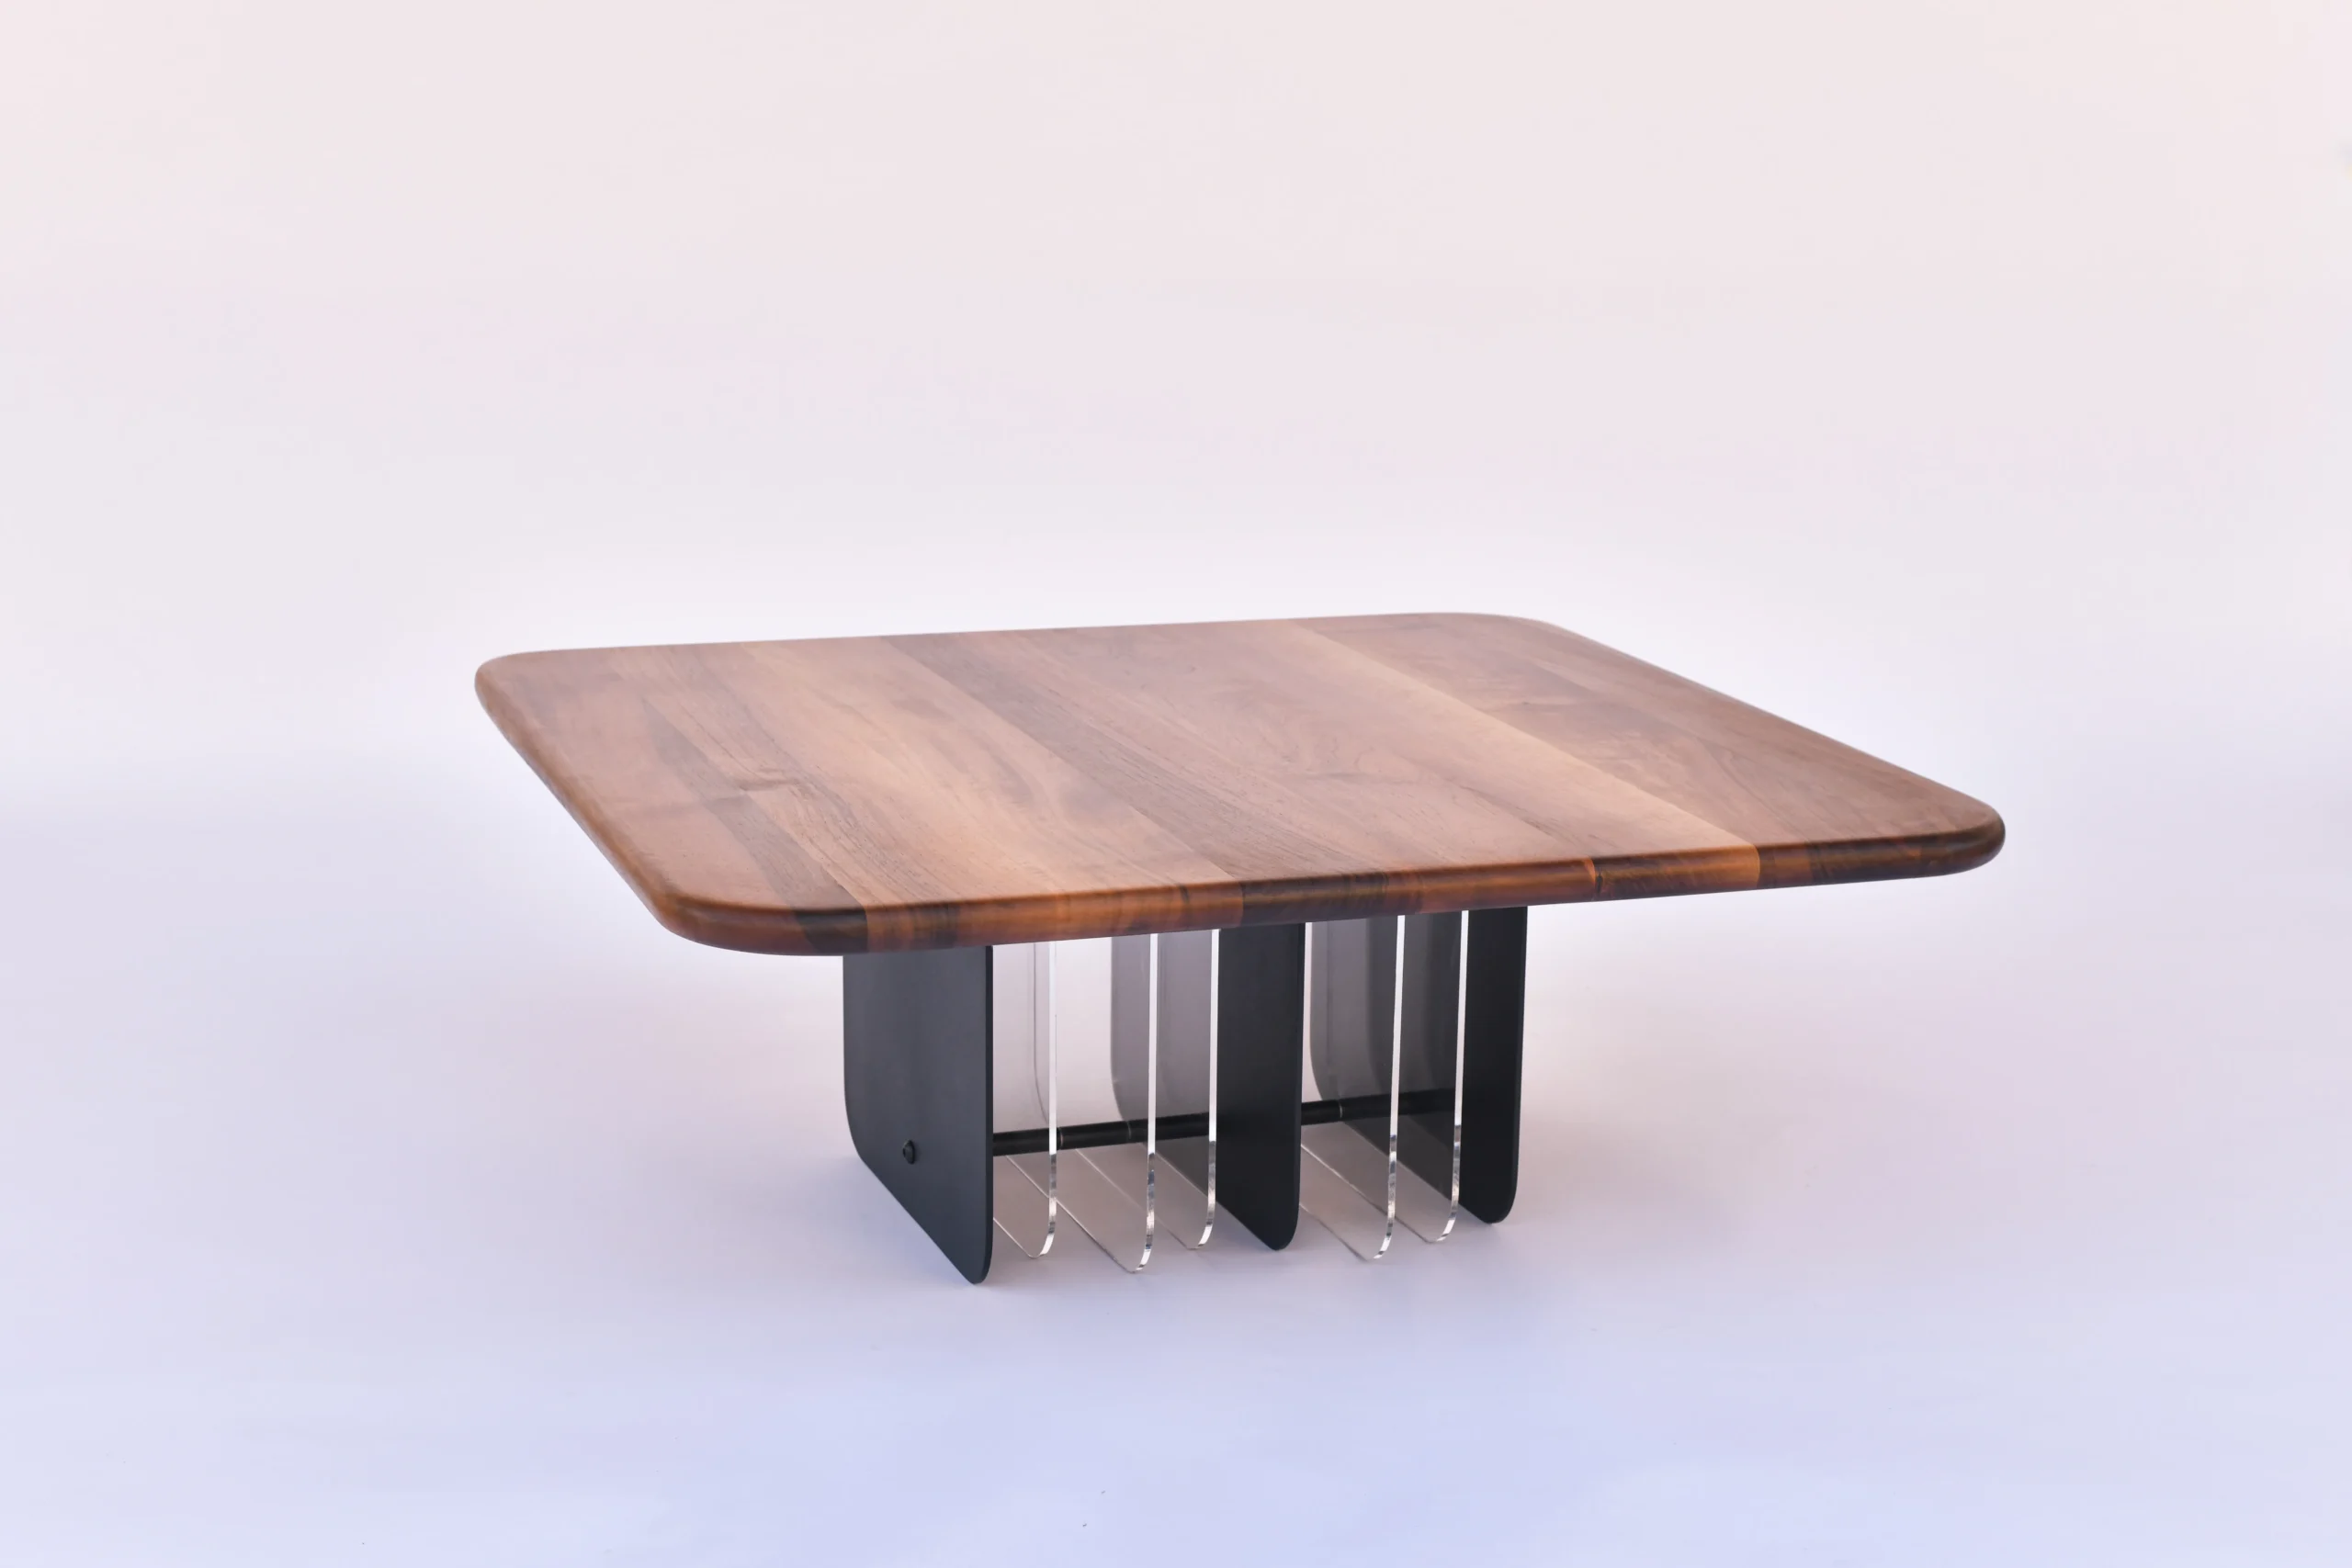 Netto is an Art Deco-inspired table, made of several materials fused into one remarkable piece of furniture